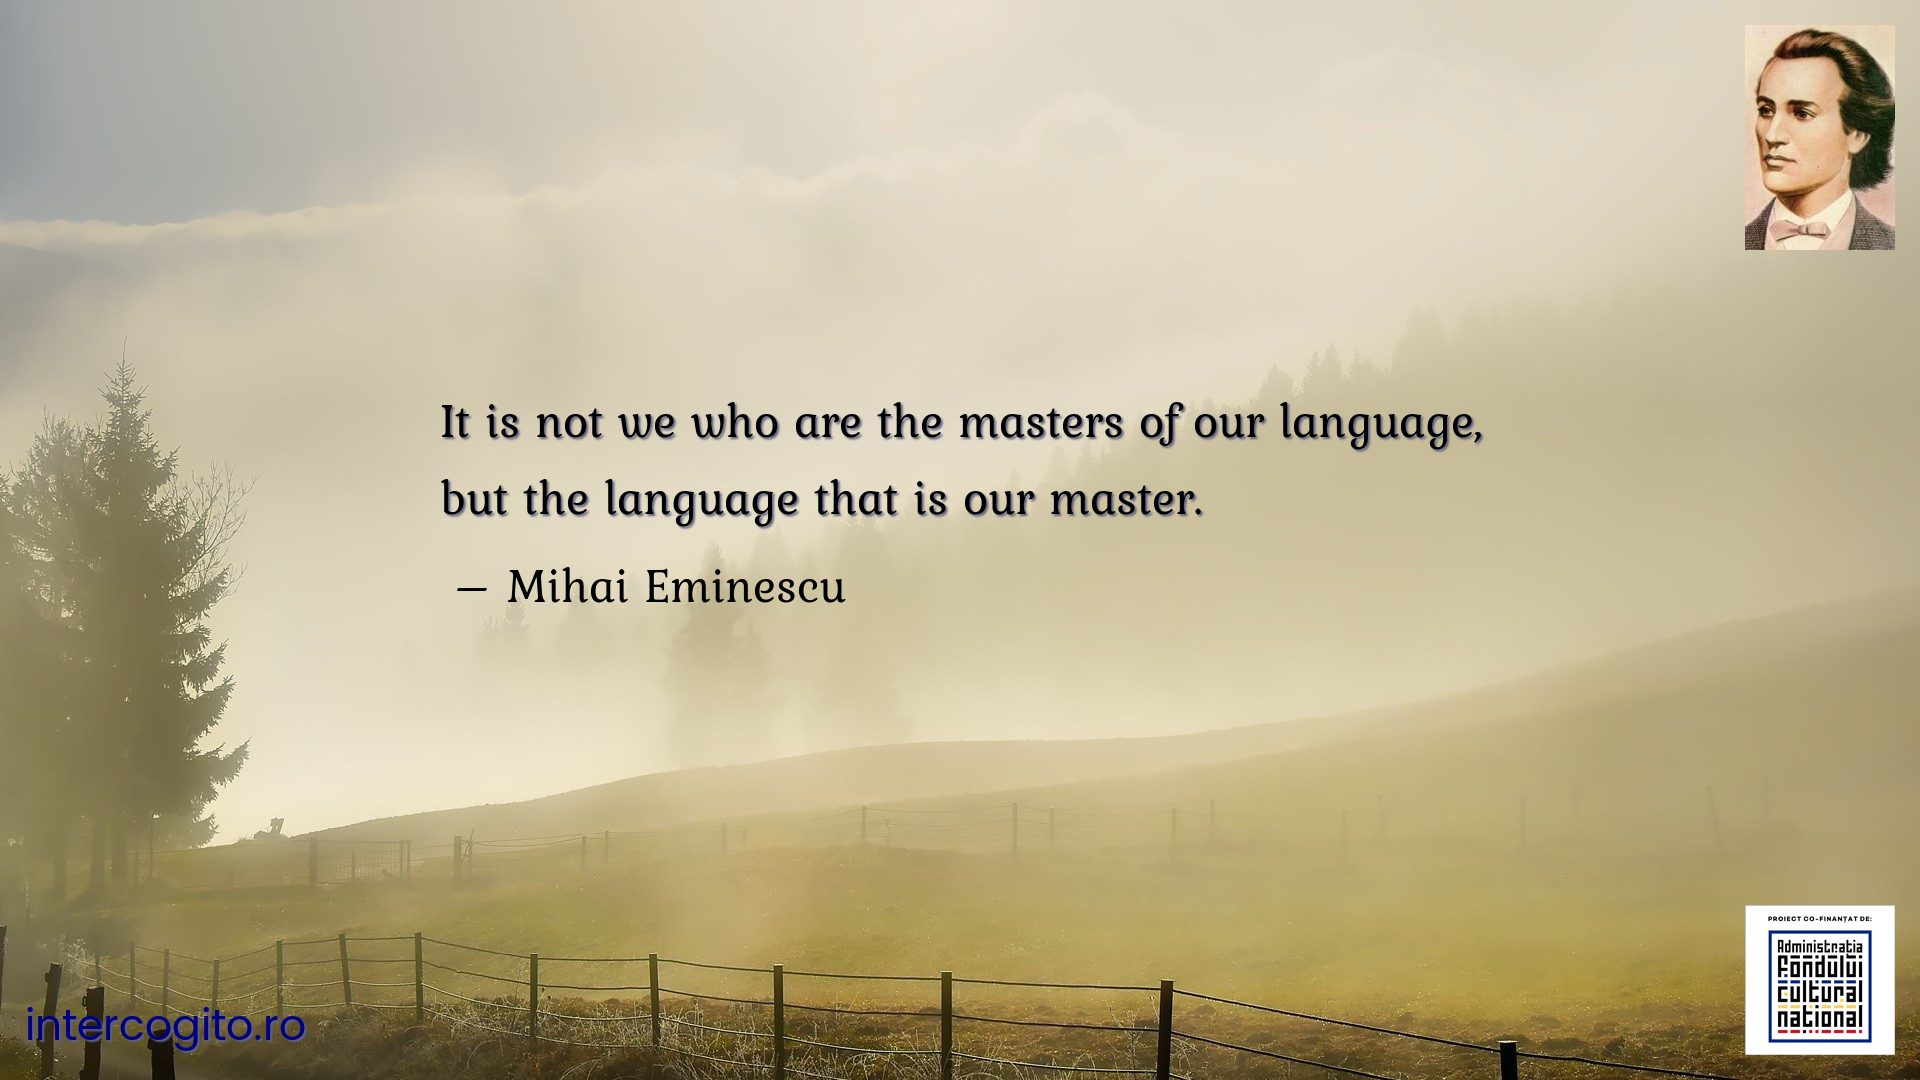 It is not we who are the masters of our language, but the language that is our master.